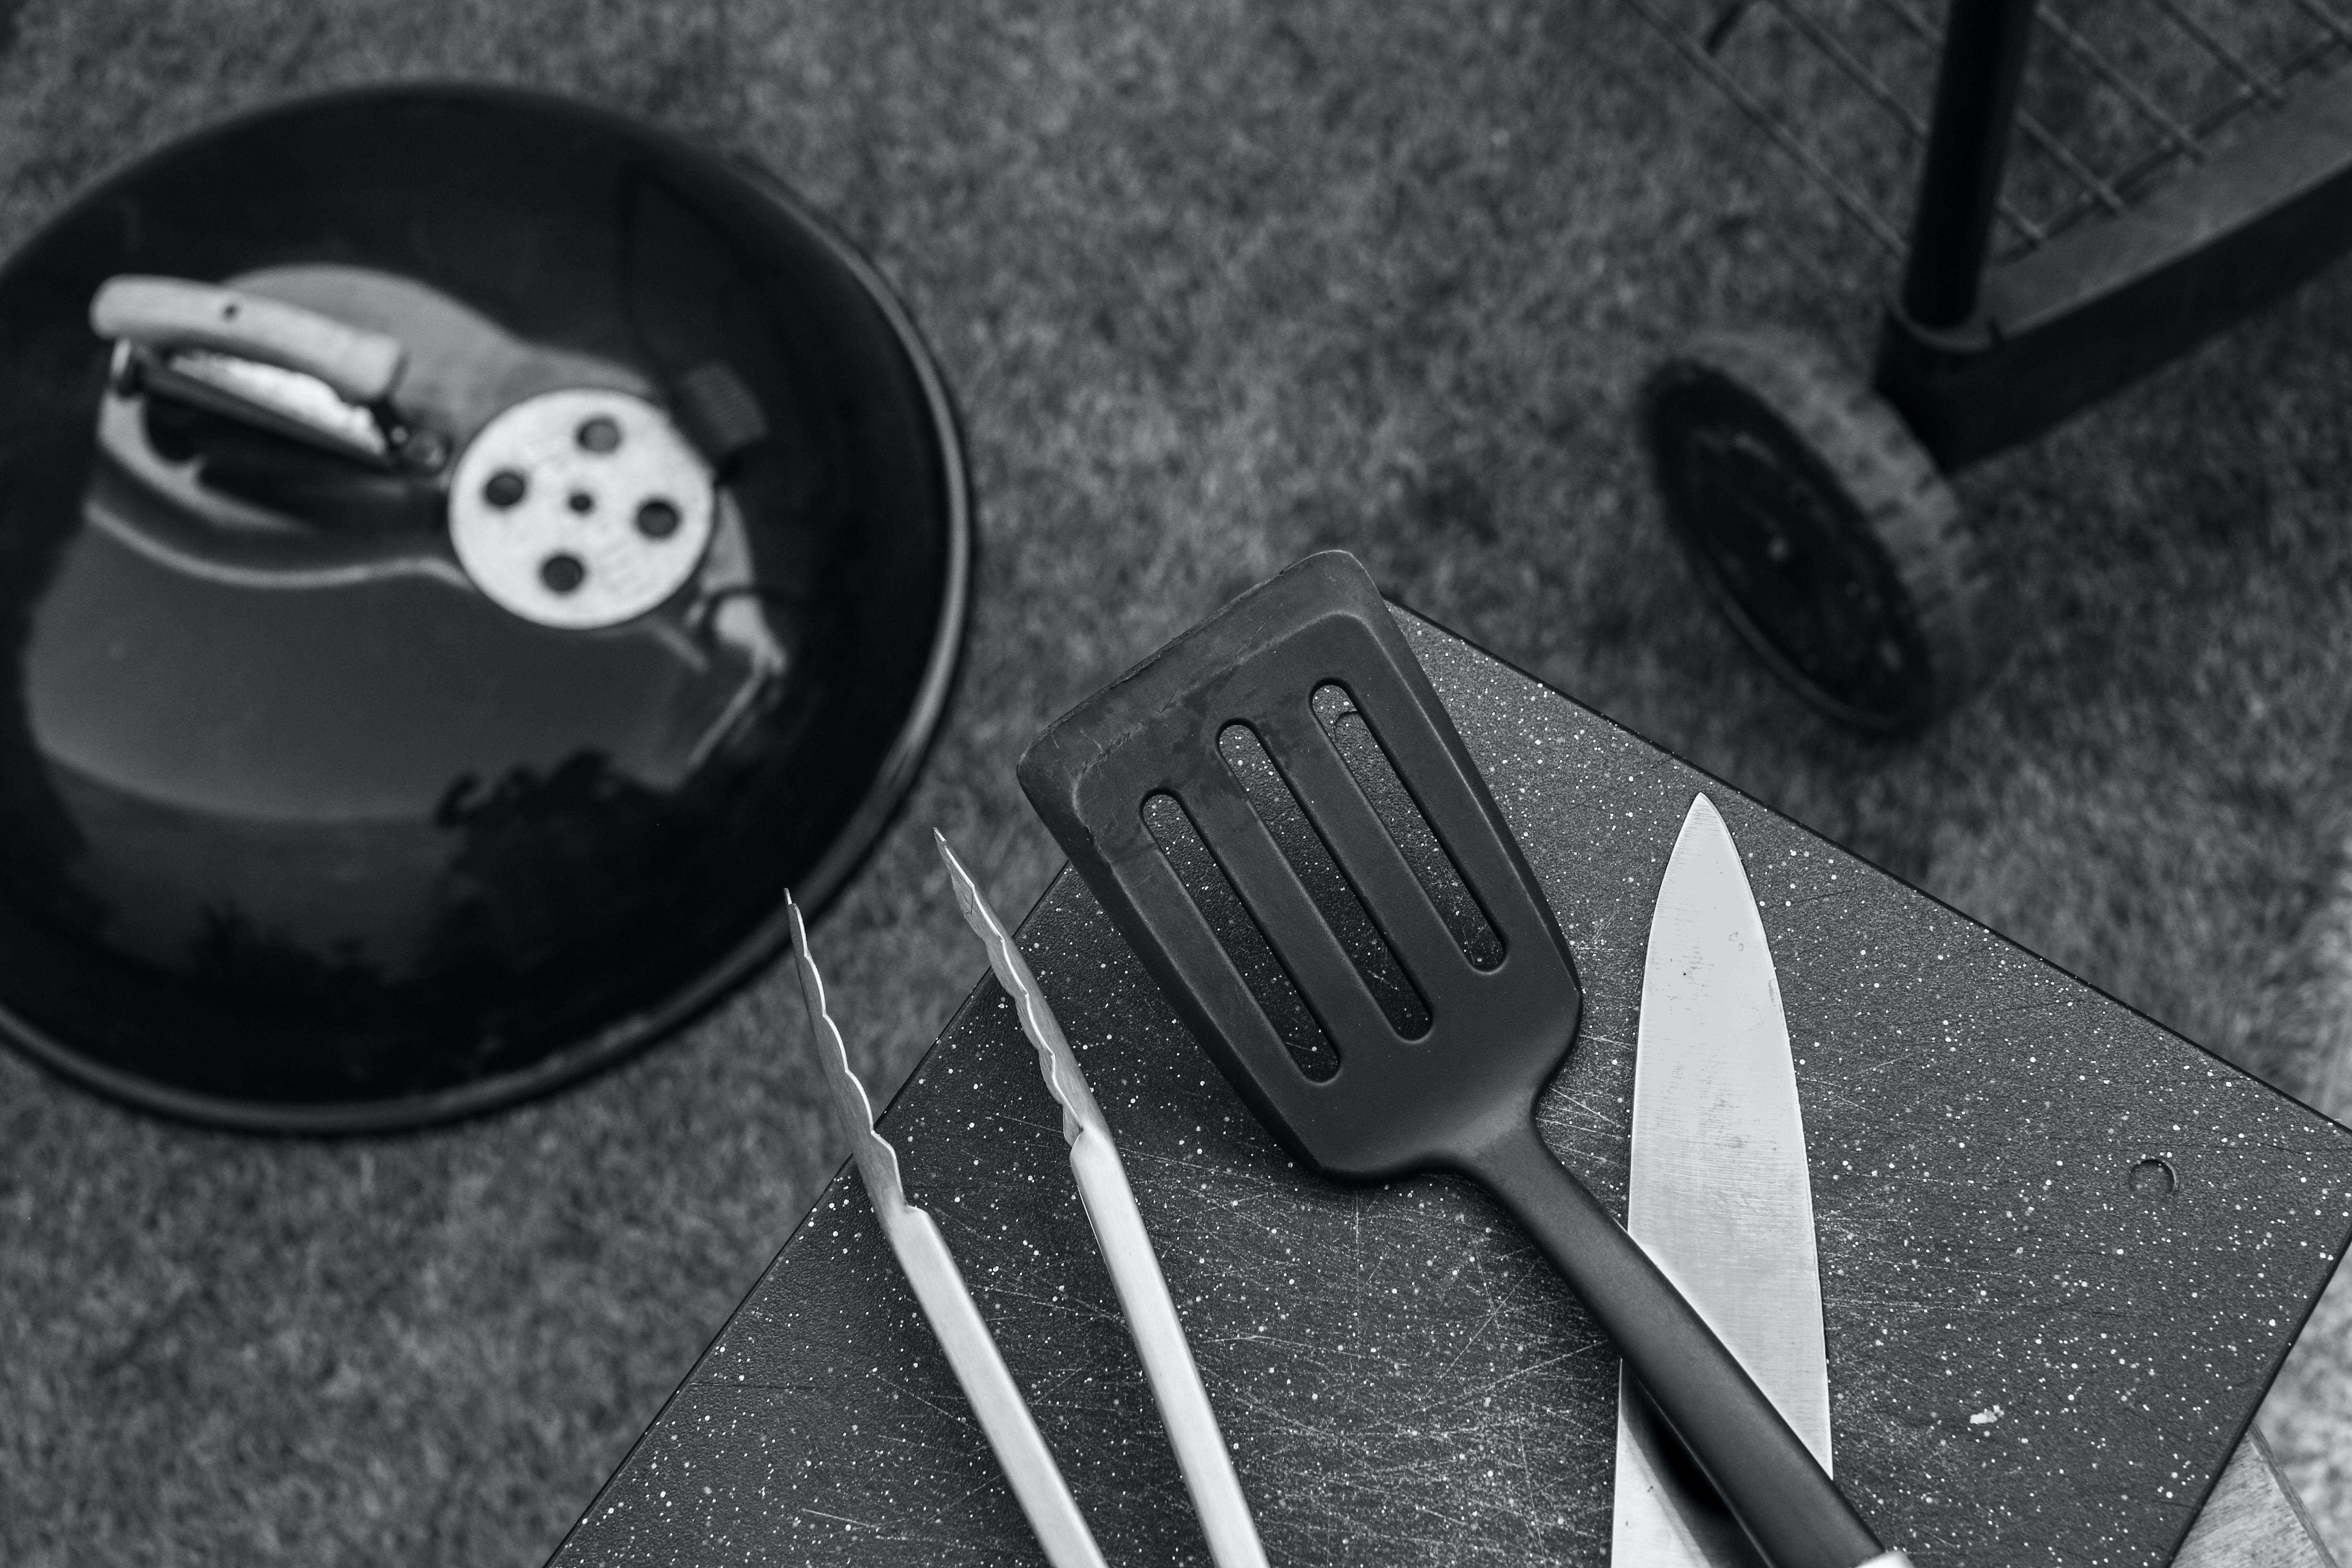 A spatula, tongs, and a knife near a grill.